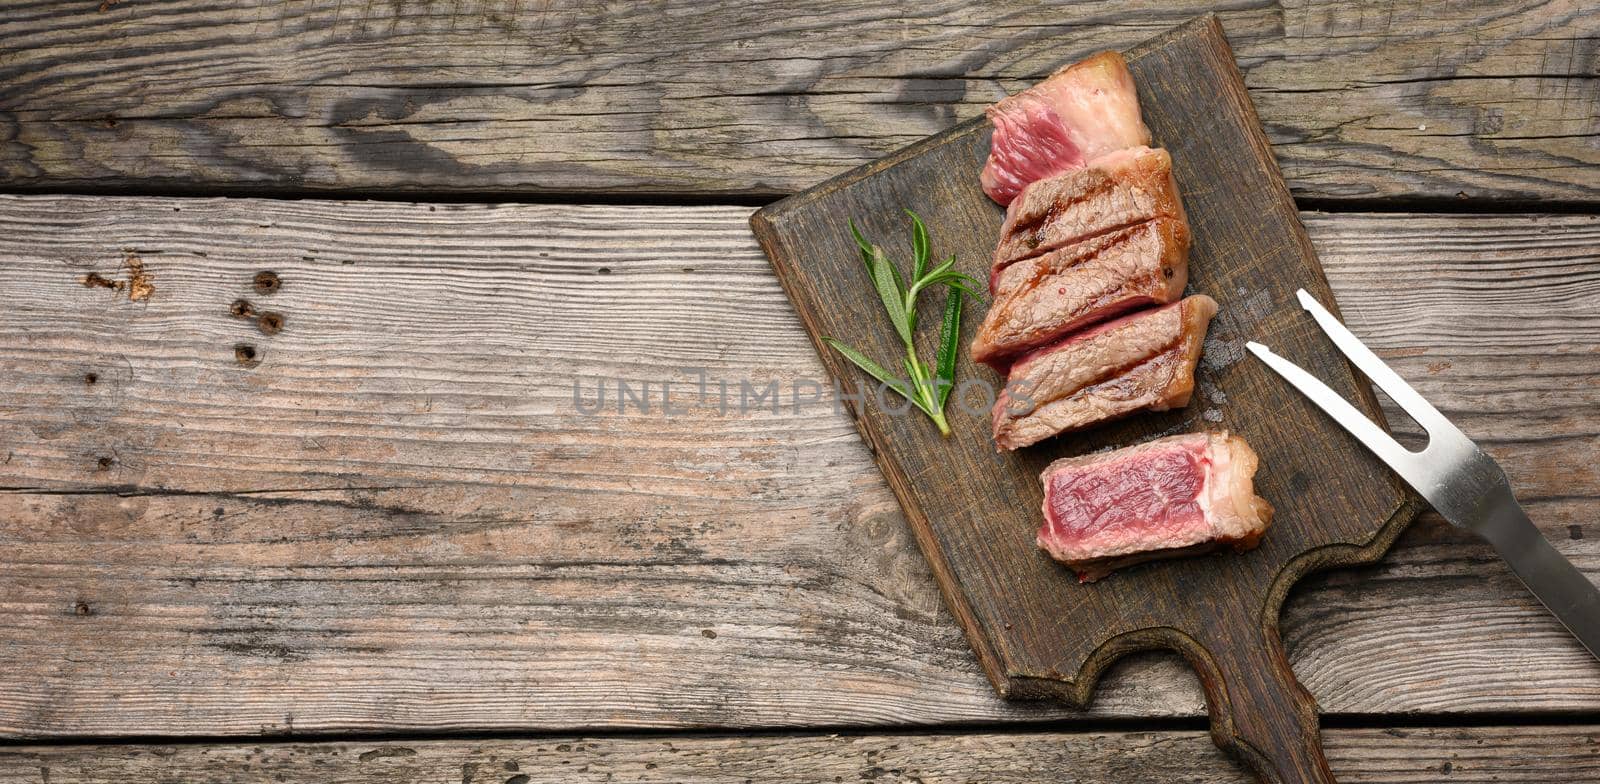 sliced fried beef steak New York striploin on a wooden cutting board, degree of doneness rare, copy space